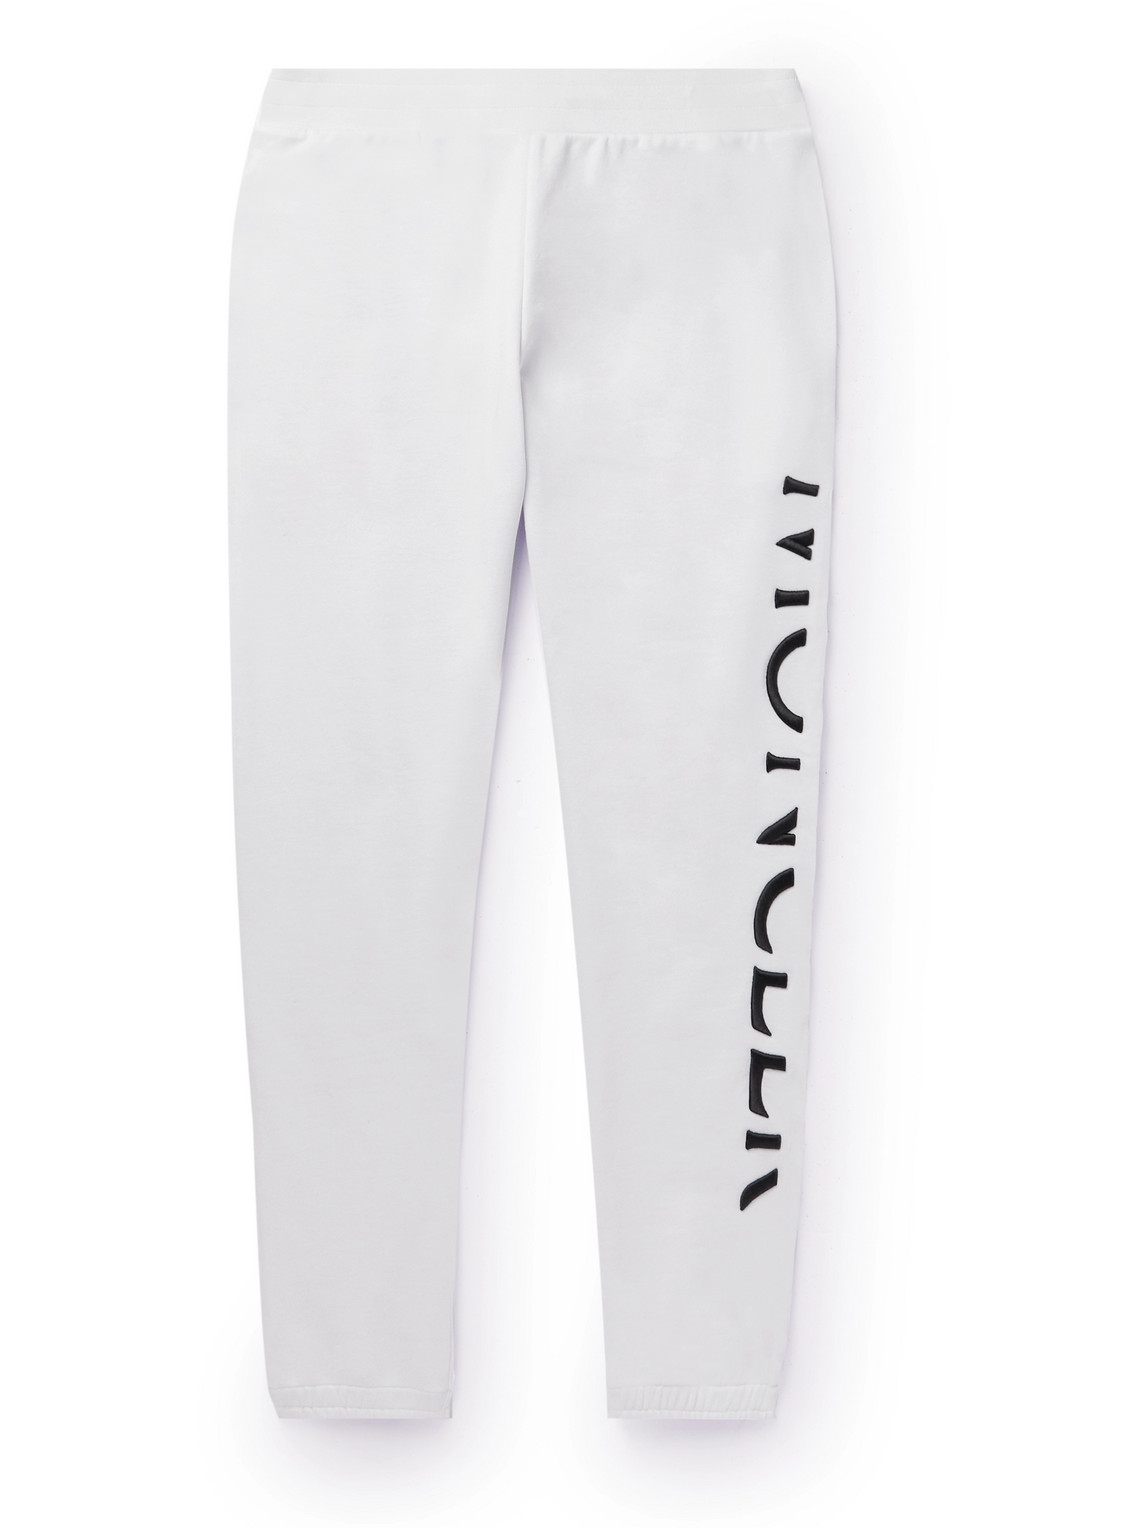 Moncler - Tapered Logo-Embroidered Cotton-Jersey Sweatpants - Men - White - M von Moncler